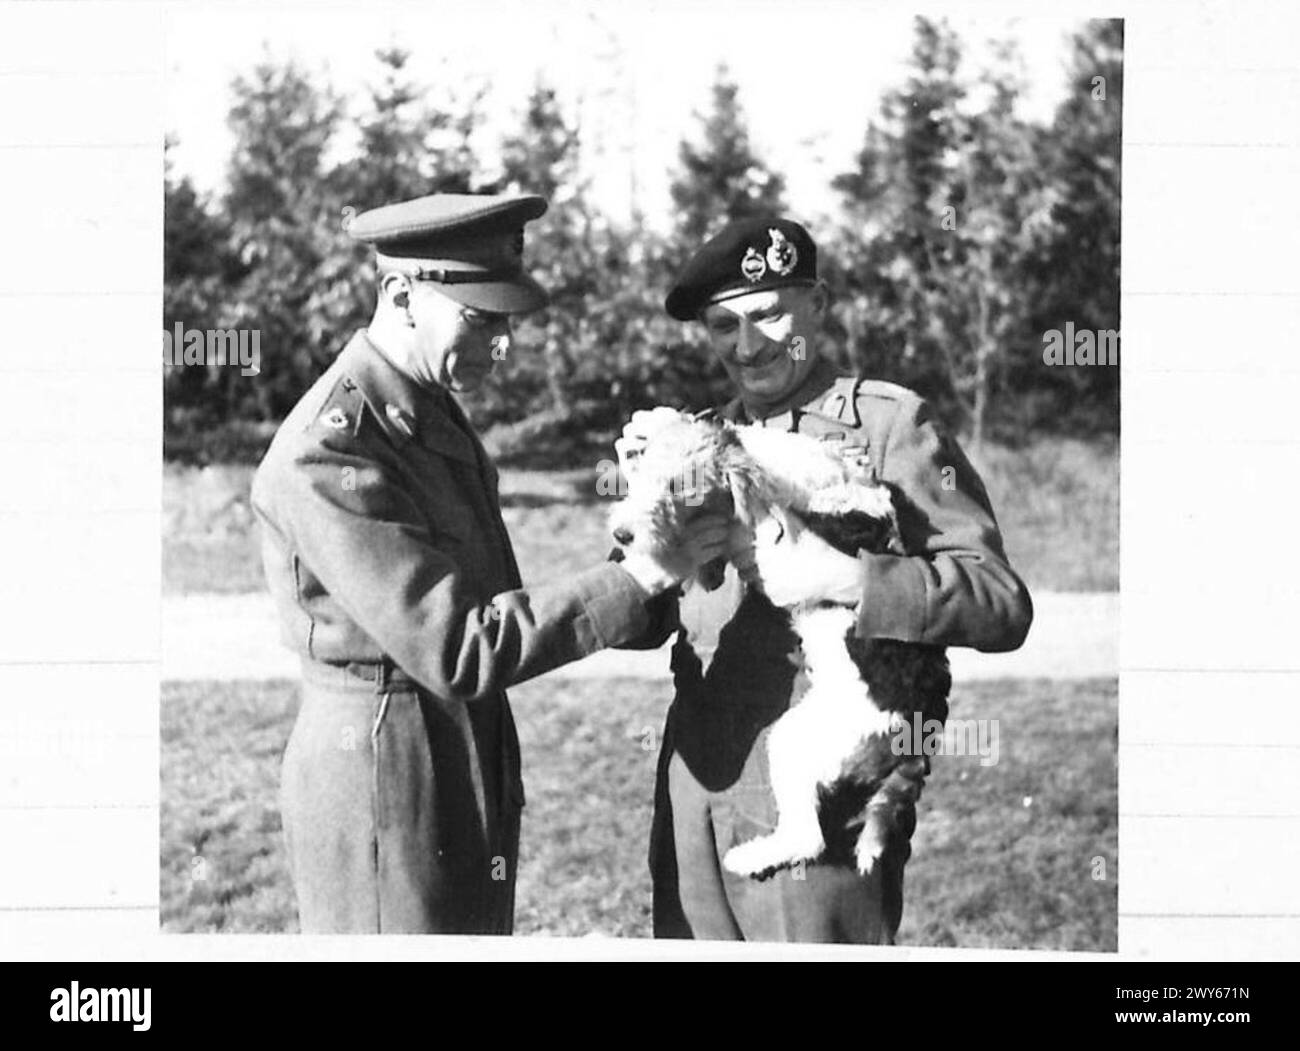 'THE JOKE IS ON HITLER' - Field Marshal Montgomery introduces his dog 'Hitler' to H.M. the King. The fact that His Majesty has been able to spend five uninterrupted days with his Armies in Holland is a Joke on the dog's namesake. , British Army, 21st Army Group Stock Photo